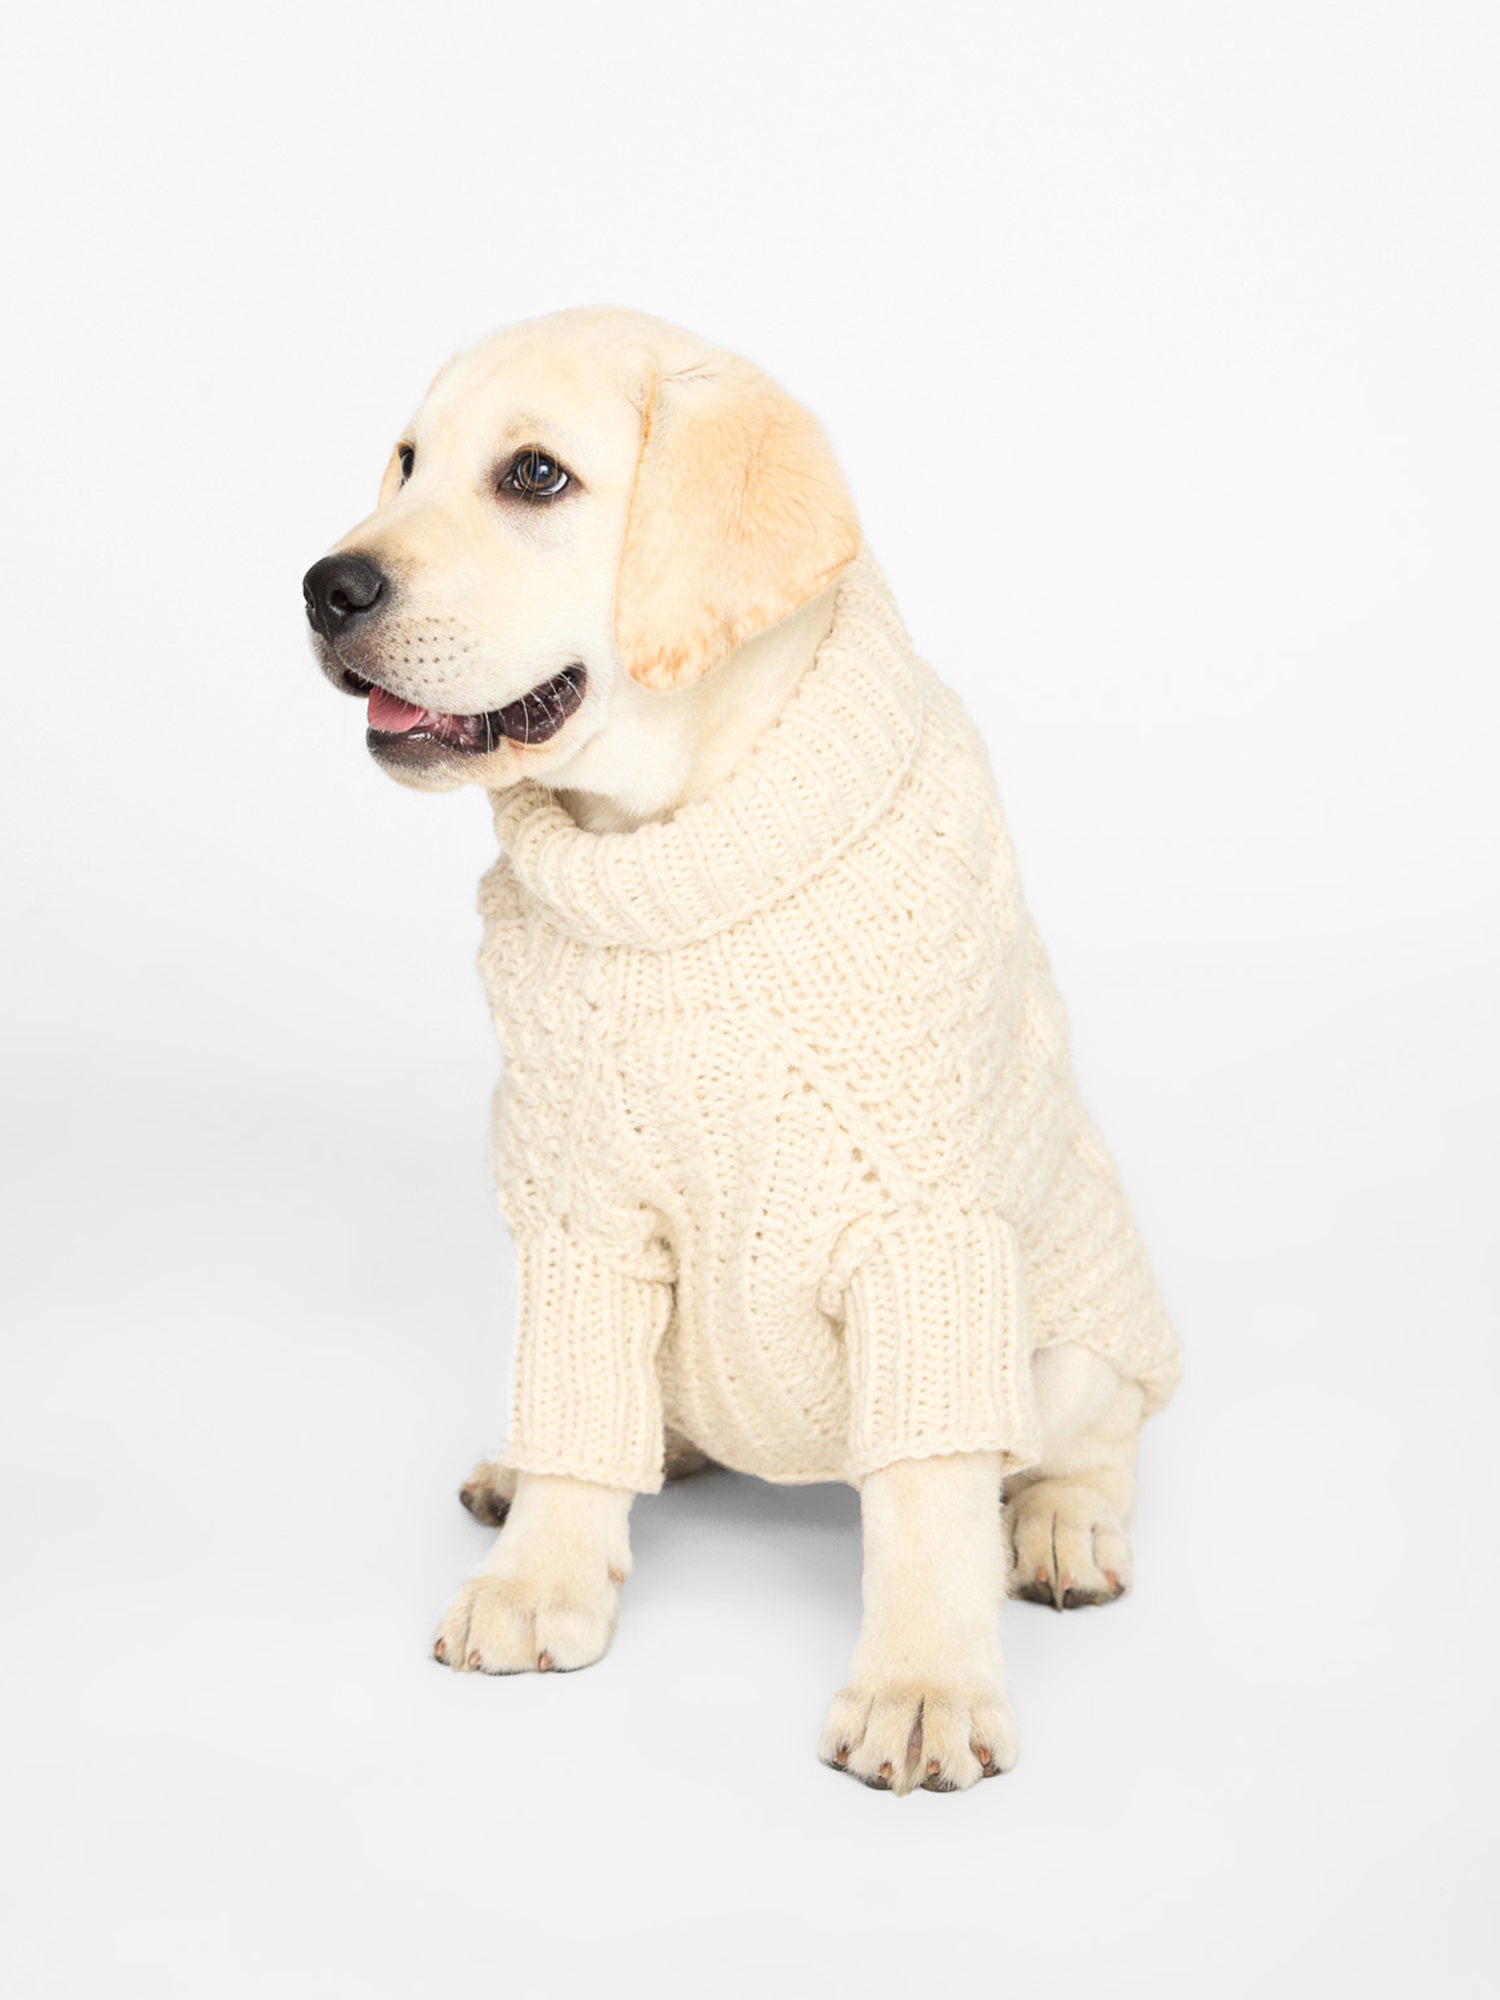 Classic Cable Knit Dog Sweater  Exclusively large dog sweaters